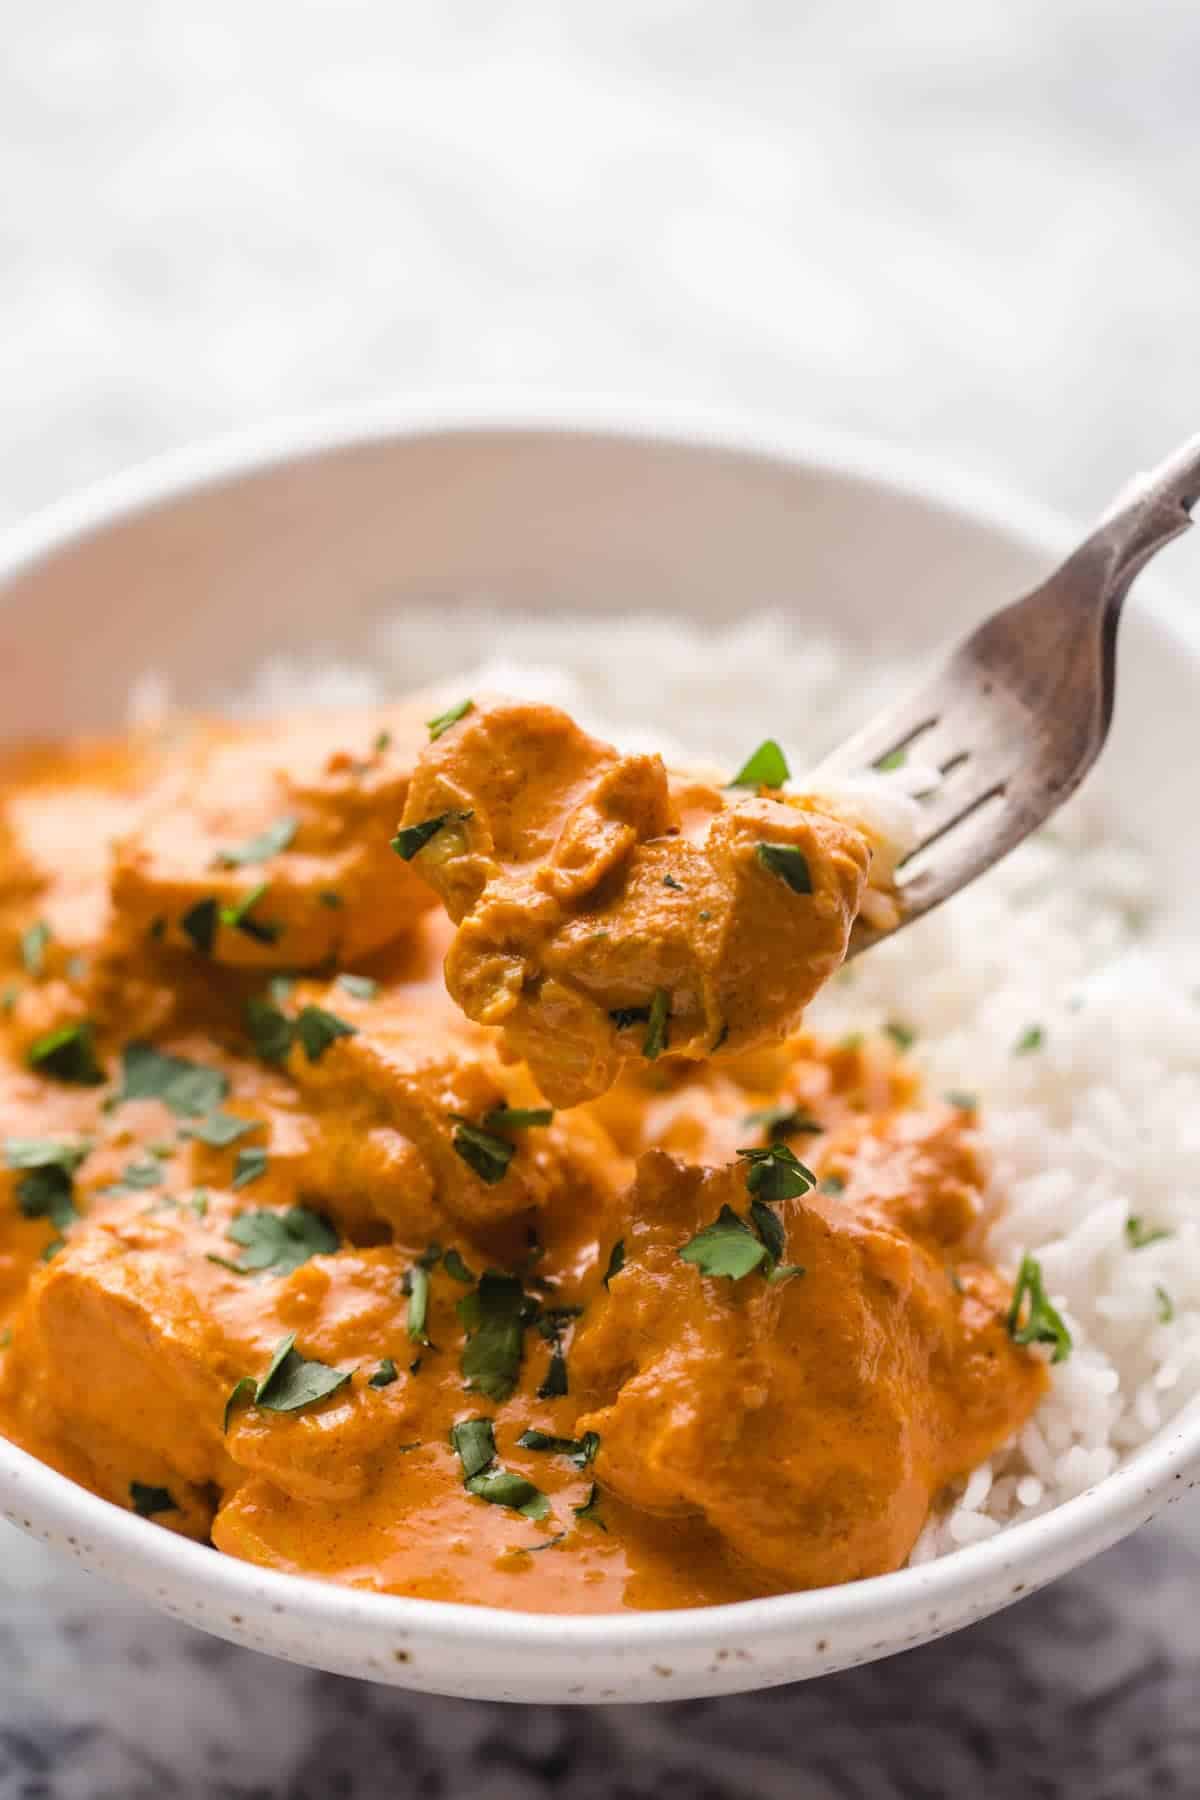 Eating butter chicken with a fork.